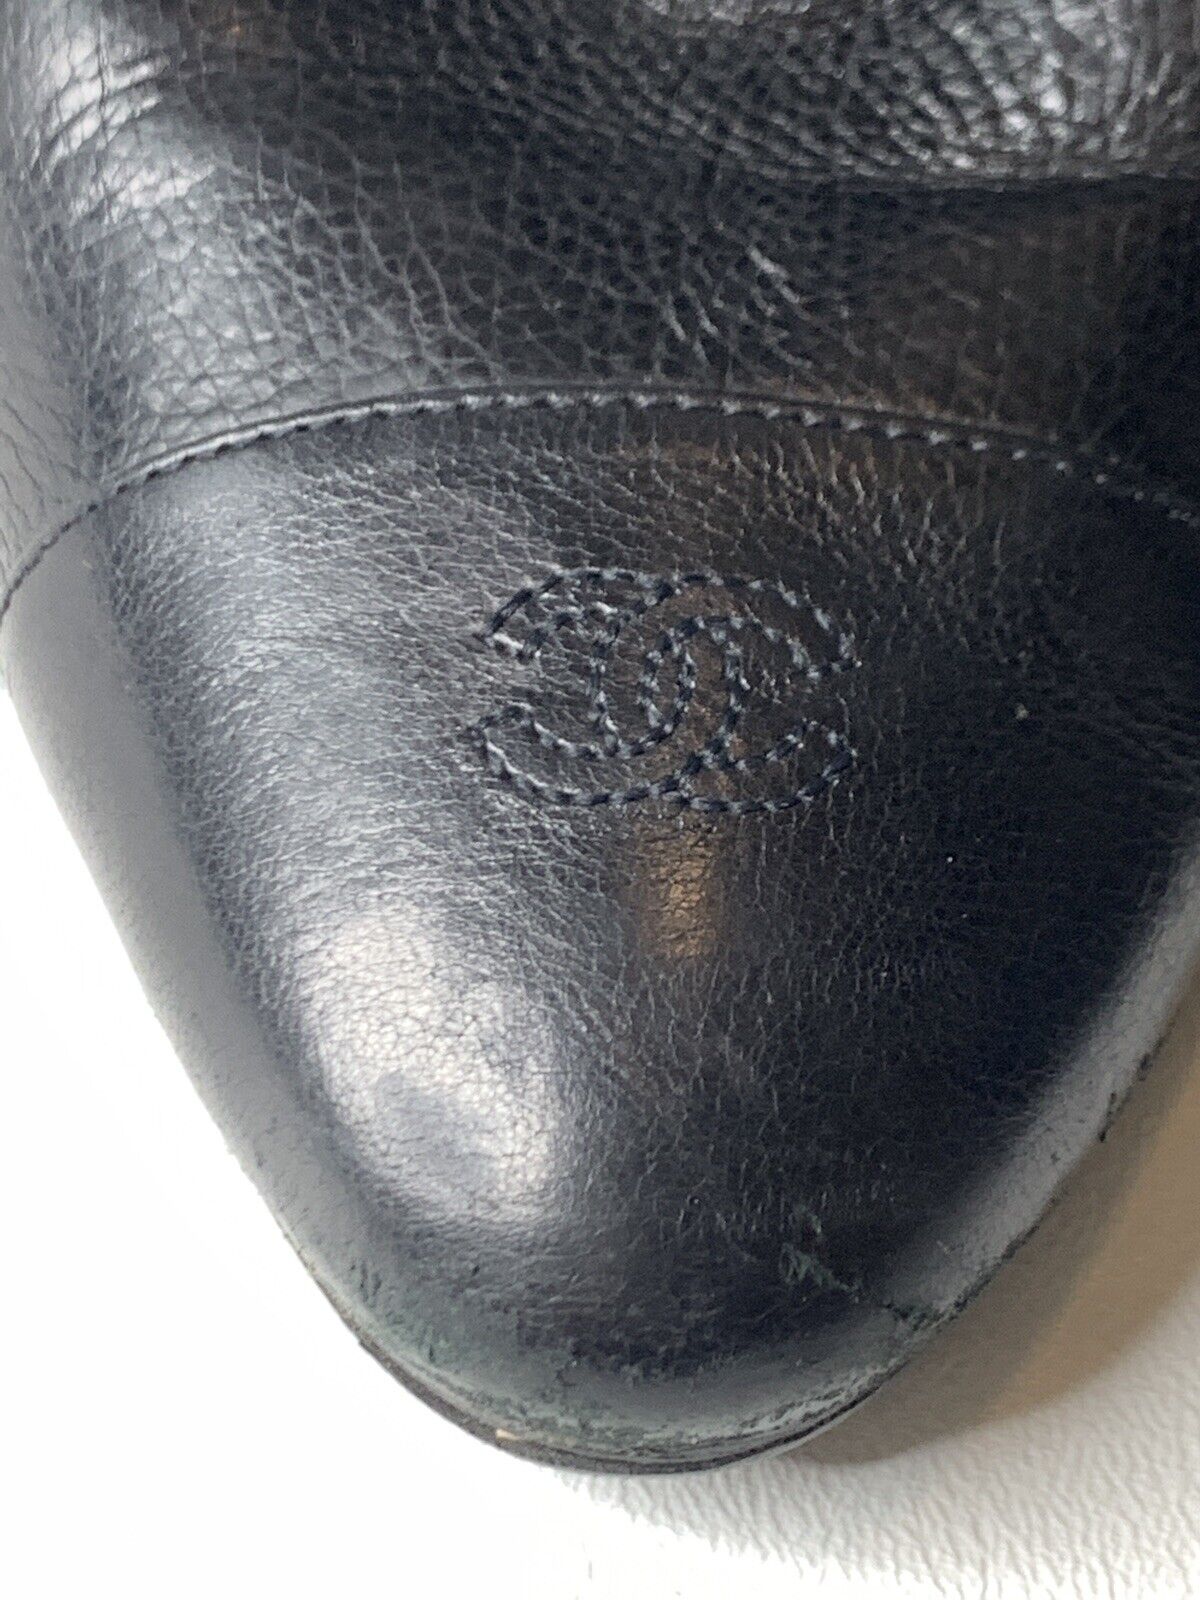 CHANEL  Black Leather Bootie 3.25" Heel | Double C Stitching at Toe | 38.5" CHANEL - фотография #2